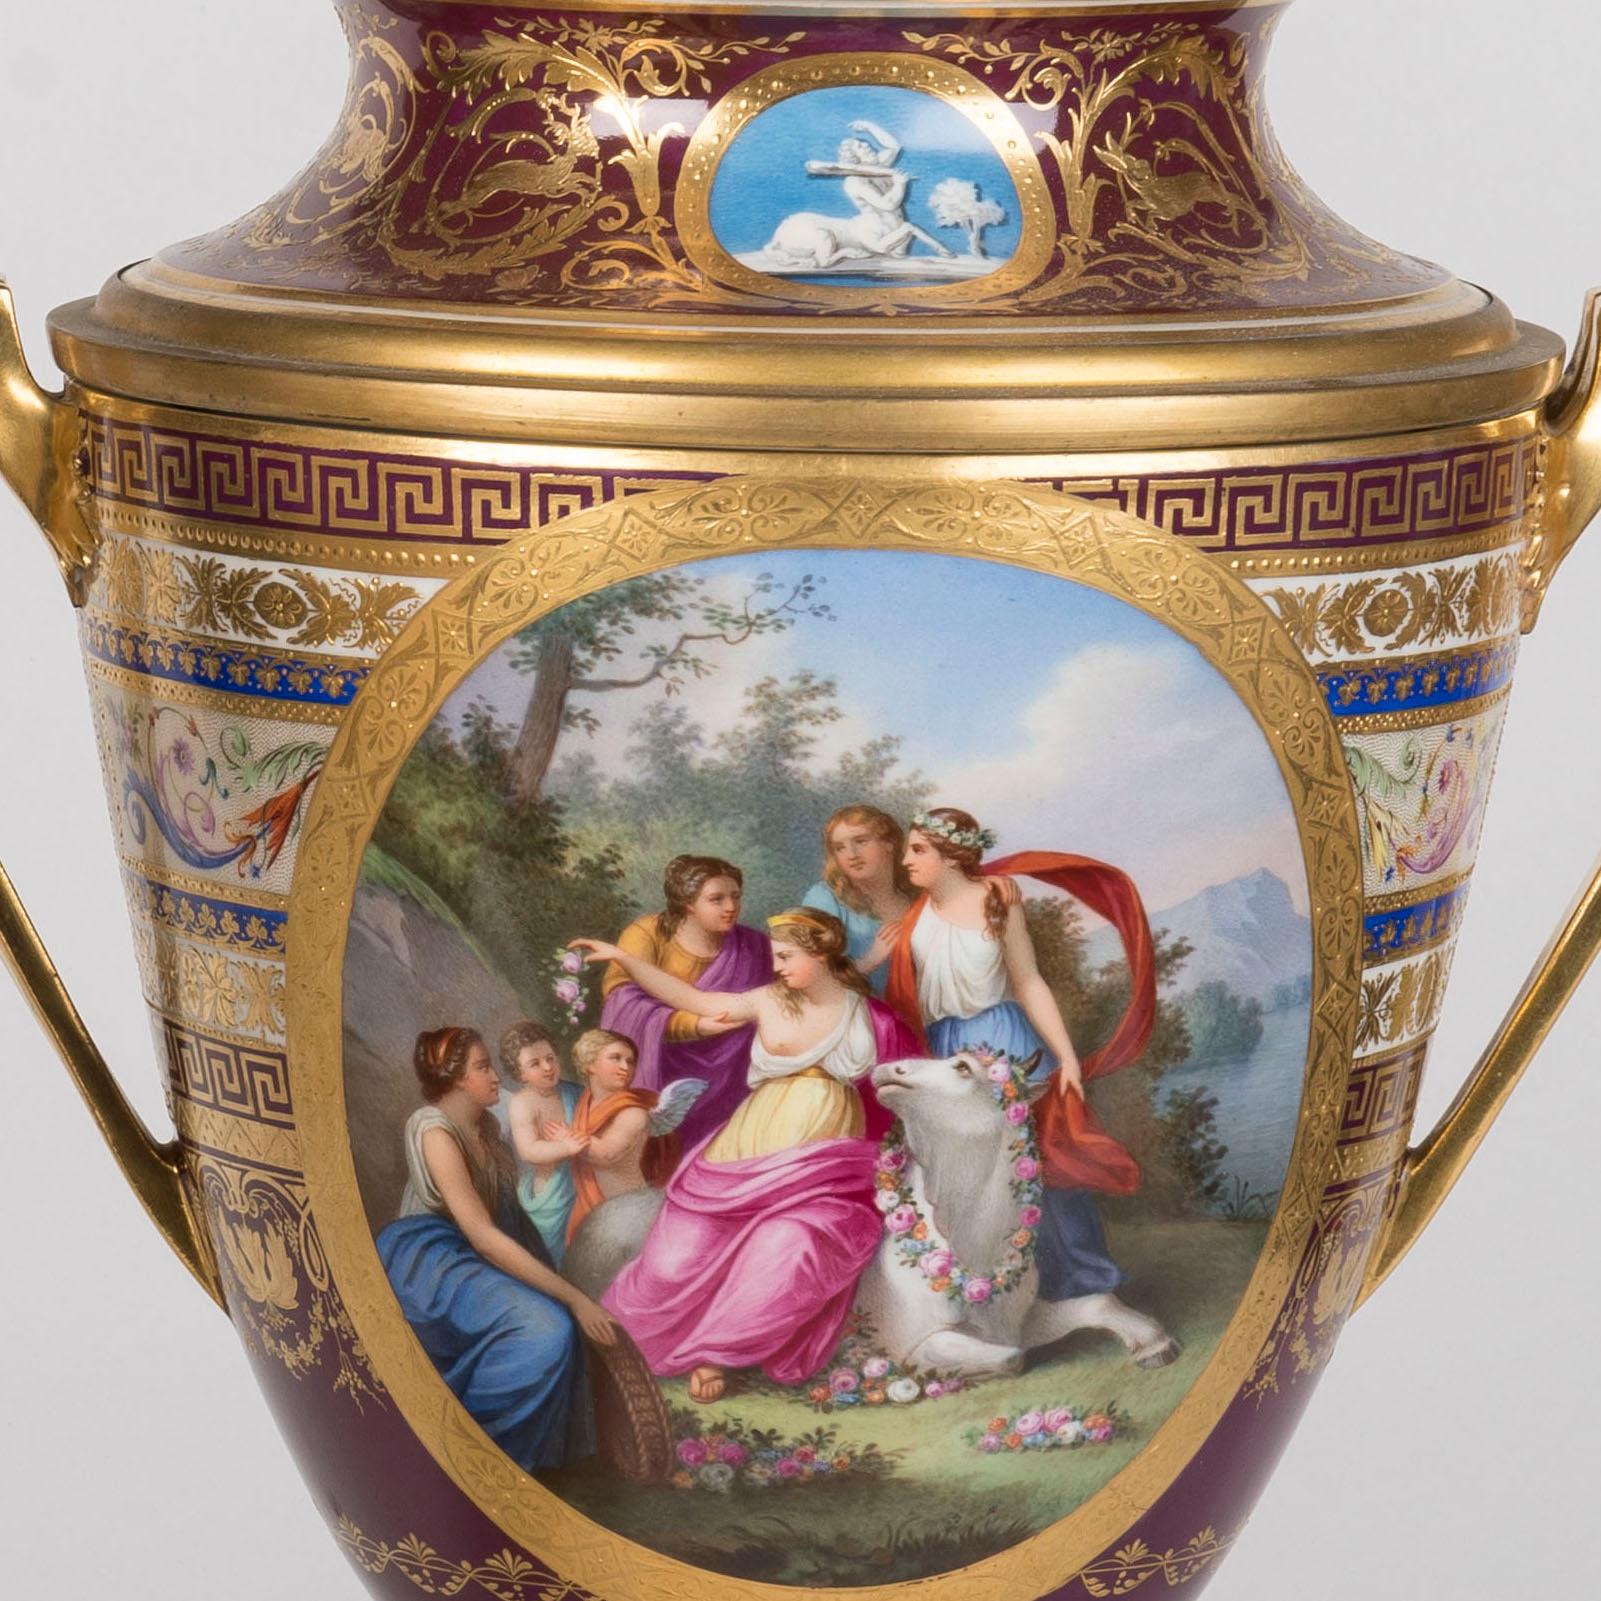 Rare 19th Century Viennese Porcelain Hand-Painted Ice Cream Pail Vases For Sale 3